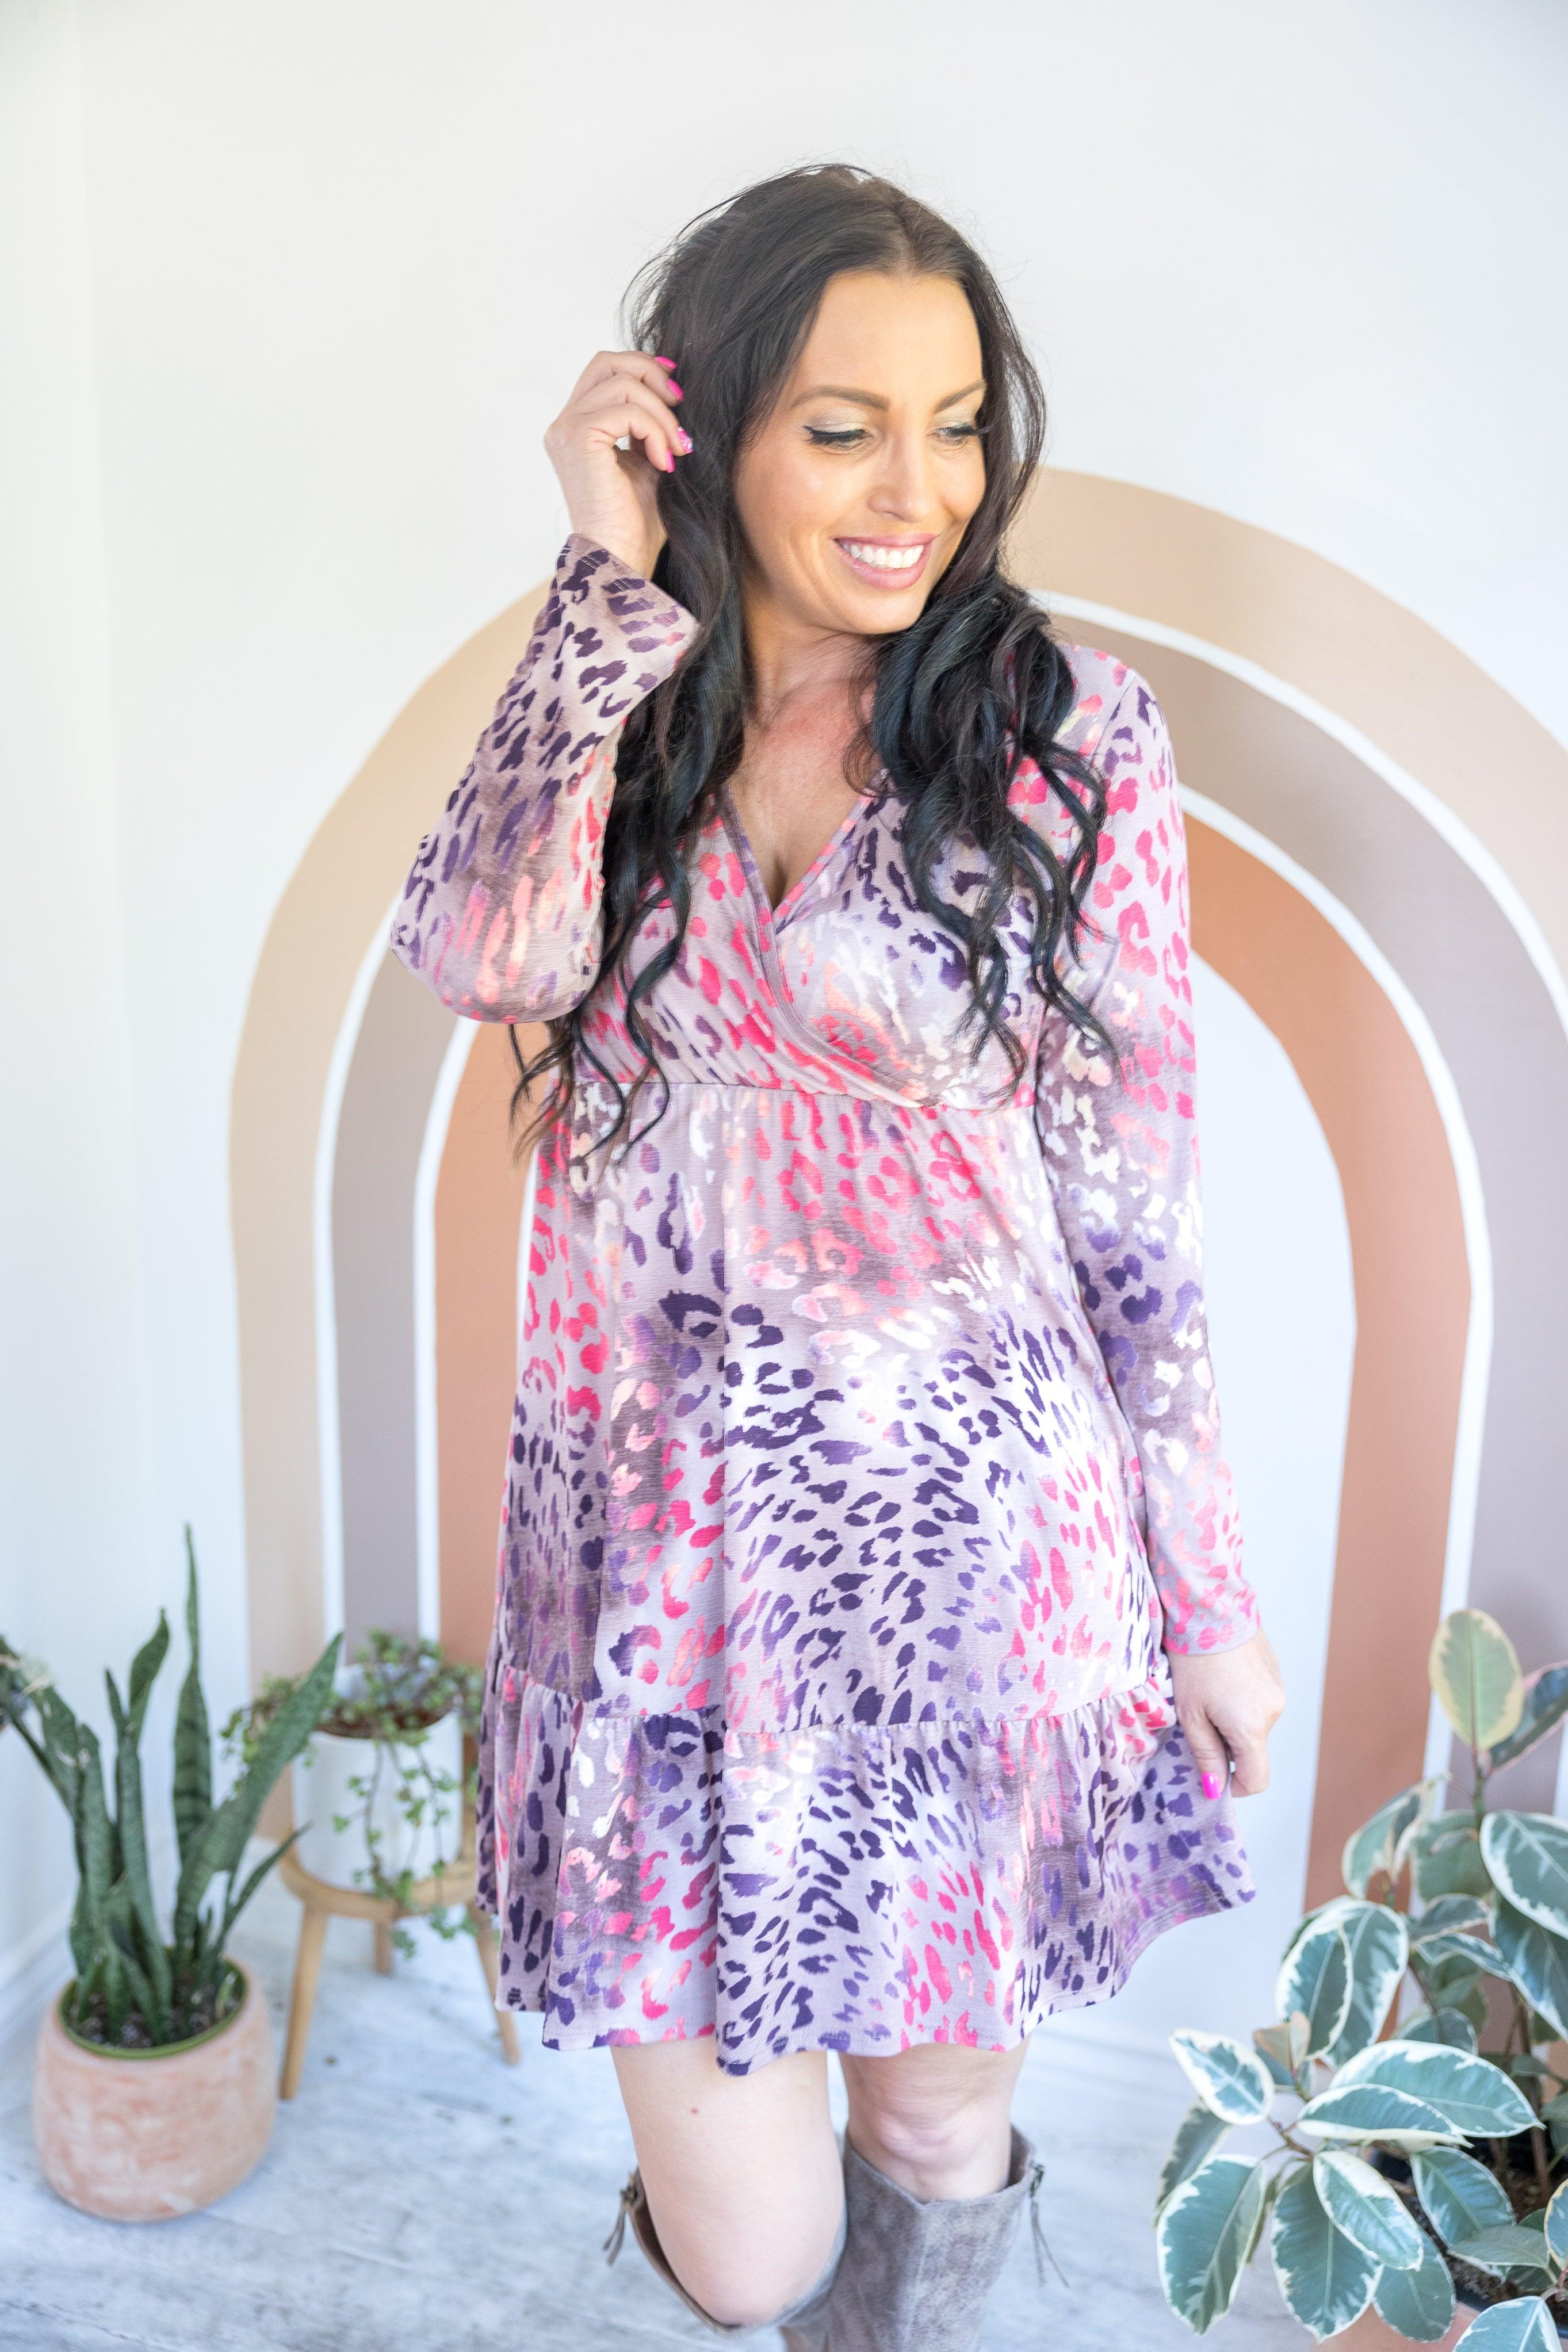 Spin Me Right Round - Dress Giftmas Boutique Simplified   